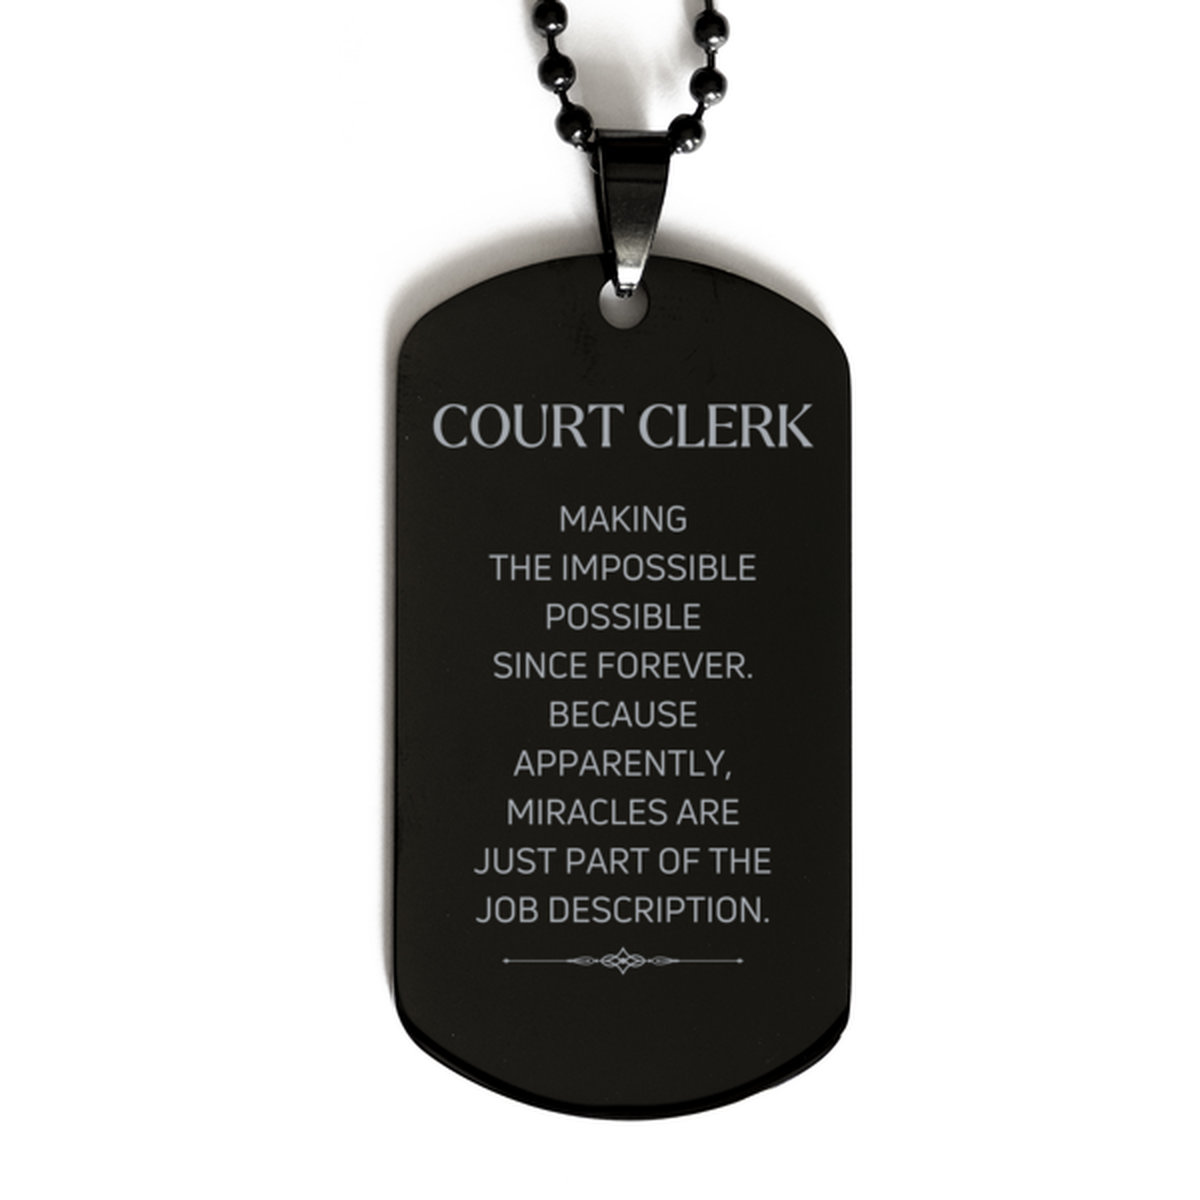 Funny Court Clerk Gifts, Miracles are just part of the job description, Inspirational Birthday Black Dog Tag For Court Clerk, Men, Women, Coworkers, Friends, Boss